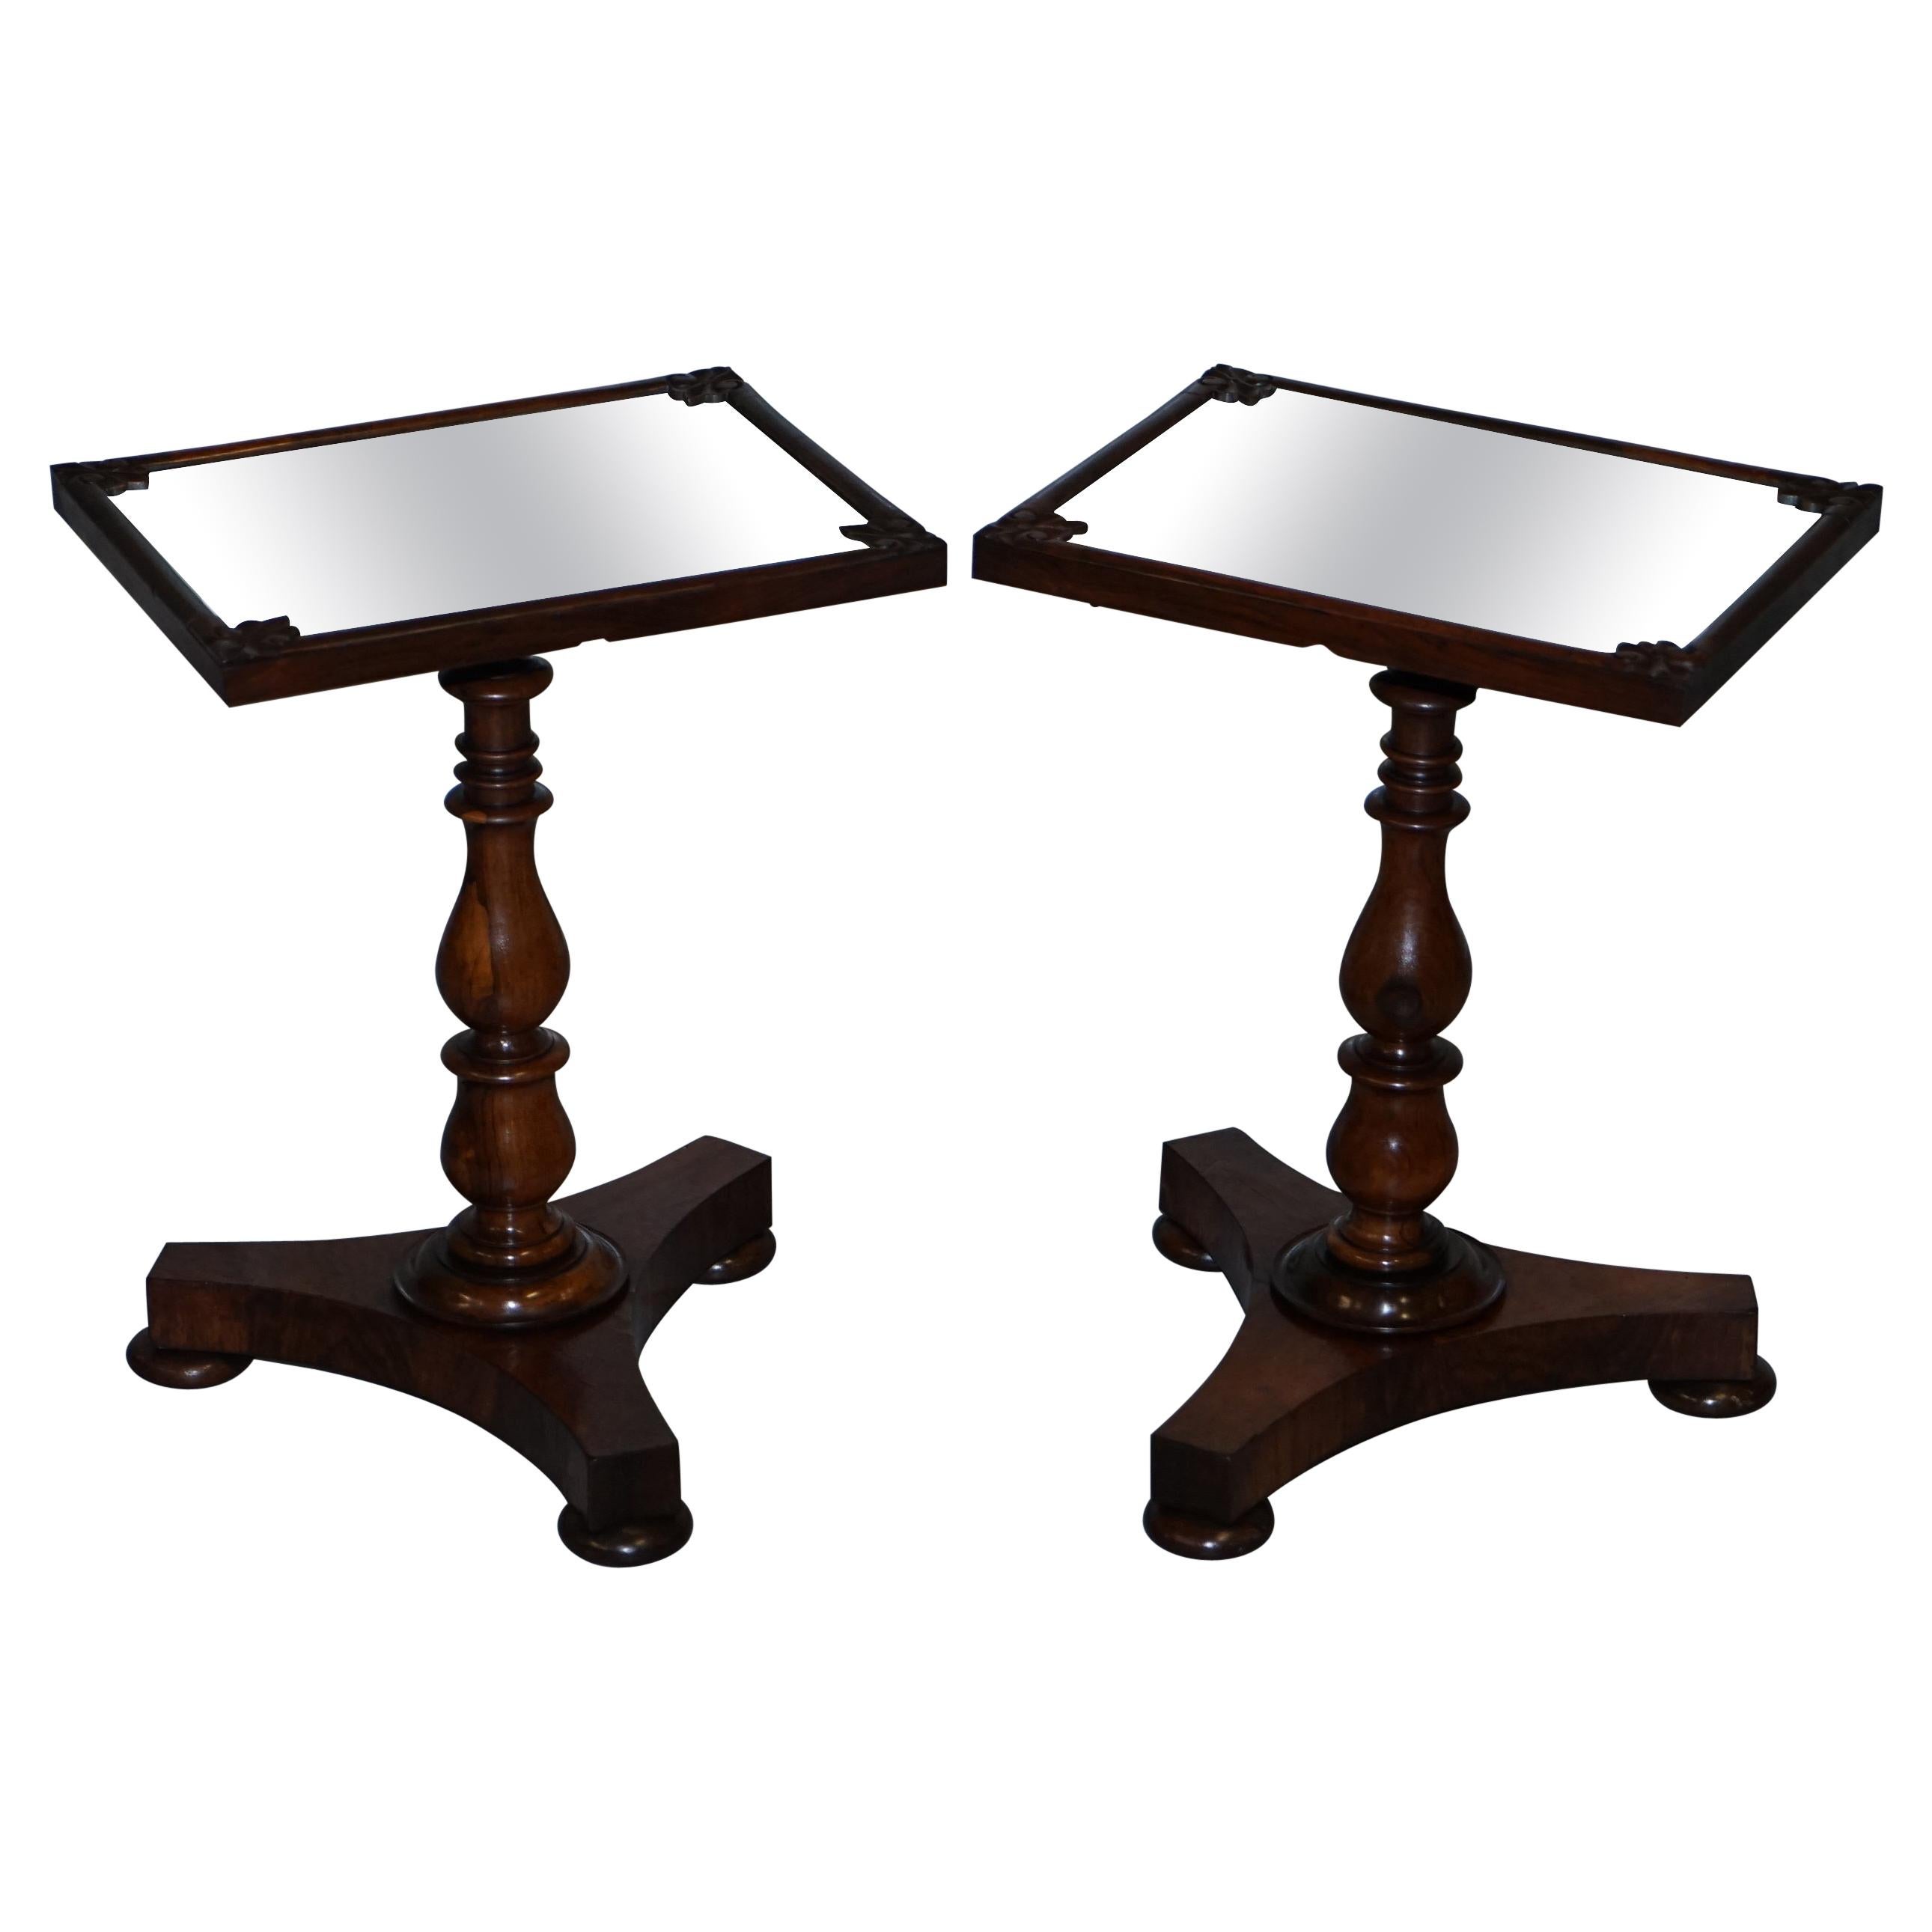 Pair of Stunning Original 1830 William IV Hardwood Mirrored Top Side Lamp Tables For Sale